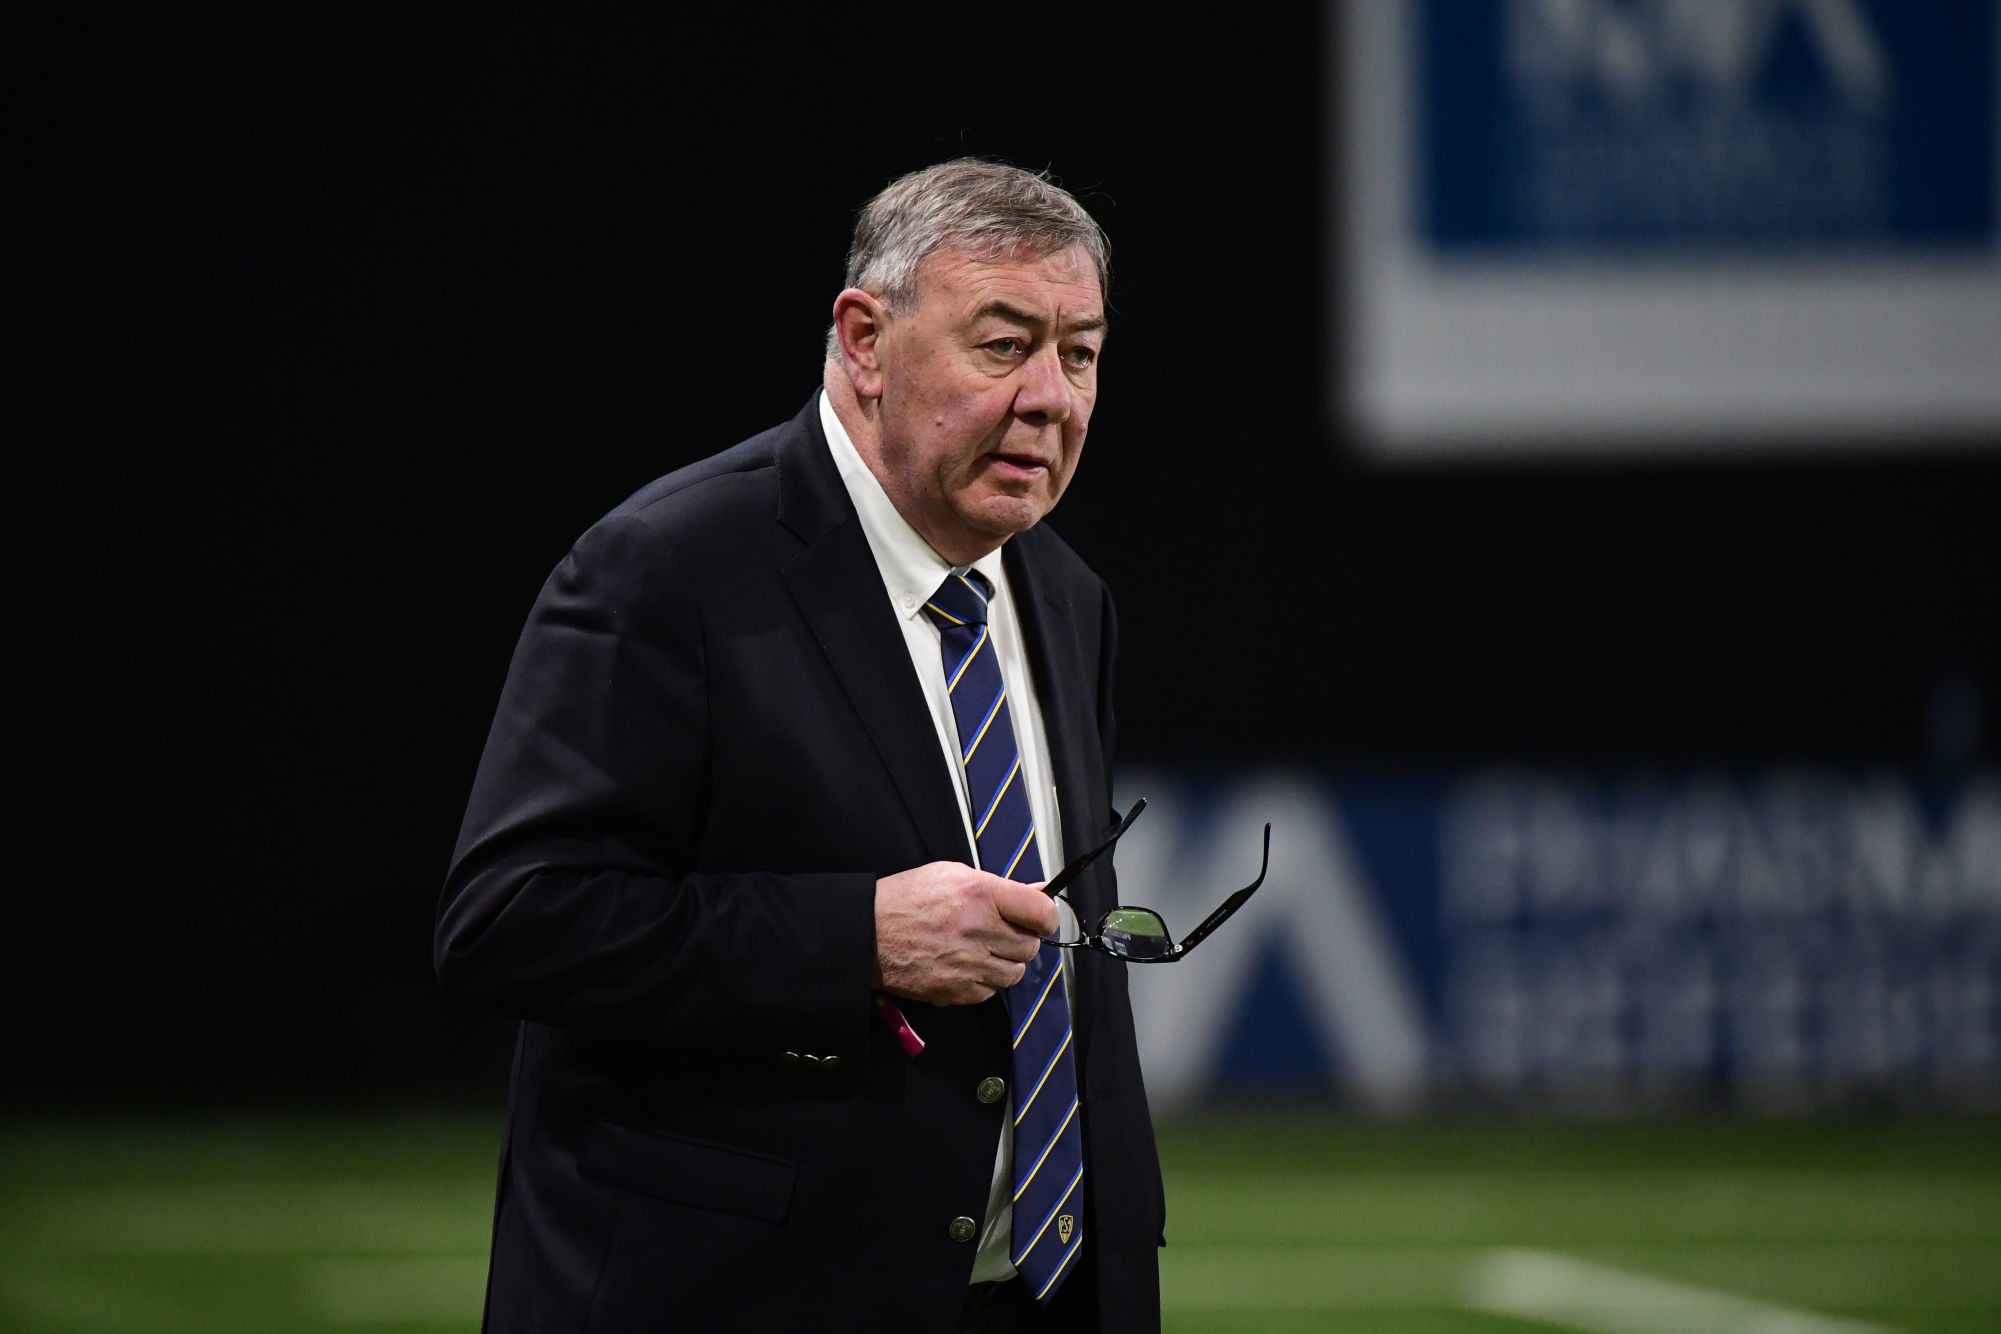 Clermont president Eric DE CROMIERES during the Top 14 match between Racing 92 and Clermont on January 4, 2020 in Nanterre, France. (Photo by Dave Winter/Icon Sport) - Eric de CROMIERES - Paris La Defense Arena - Paris (France)